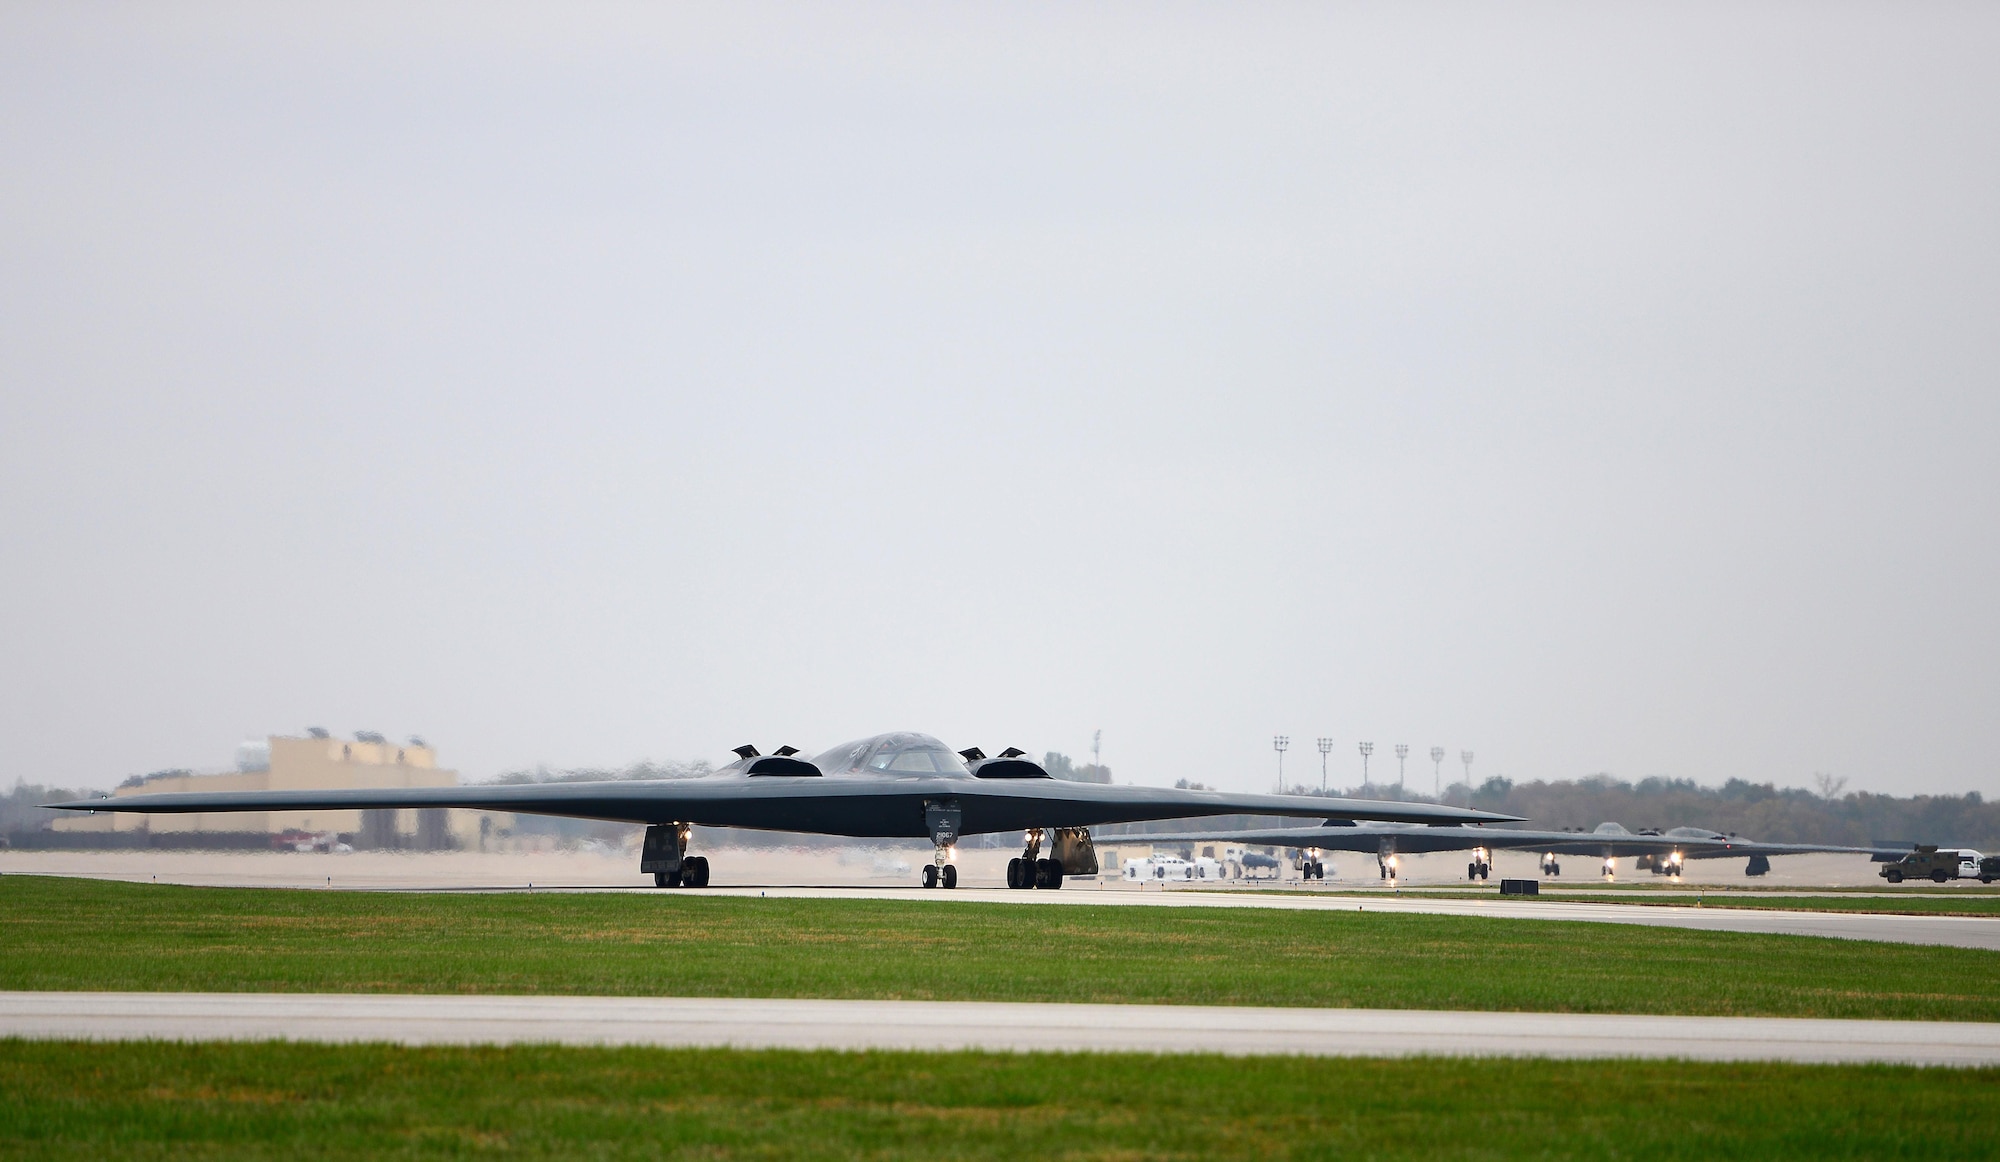 U.S. Air Force B-2 Spirit's assigned to Air Force Global Strike Command (AFGSC) prepare to take off from the runway at Whiteman Air Force Base, Mo., Oct 30, 2016, during exercise Global Thunder 17. AFGSC supports U.S. Strategic Command's (USSTRATCOM) global strike and nuclear deterrence missions by providing strategic assets, including bombers like the B-52 and B-2, to ensure a safe, secure, effective and ready deterrent force. Global Thunder is an annual training event that assesses command and control functionality in all USSTRATCOM mission areas and affords component commands a venue to evaluate their joint operational readiness.